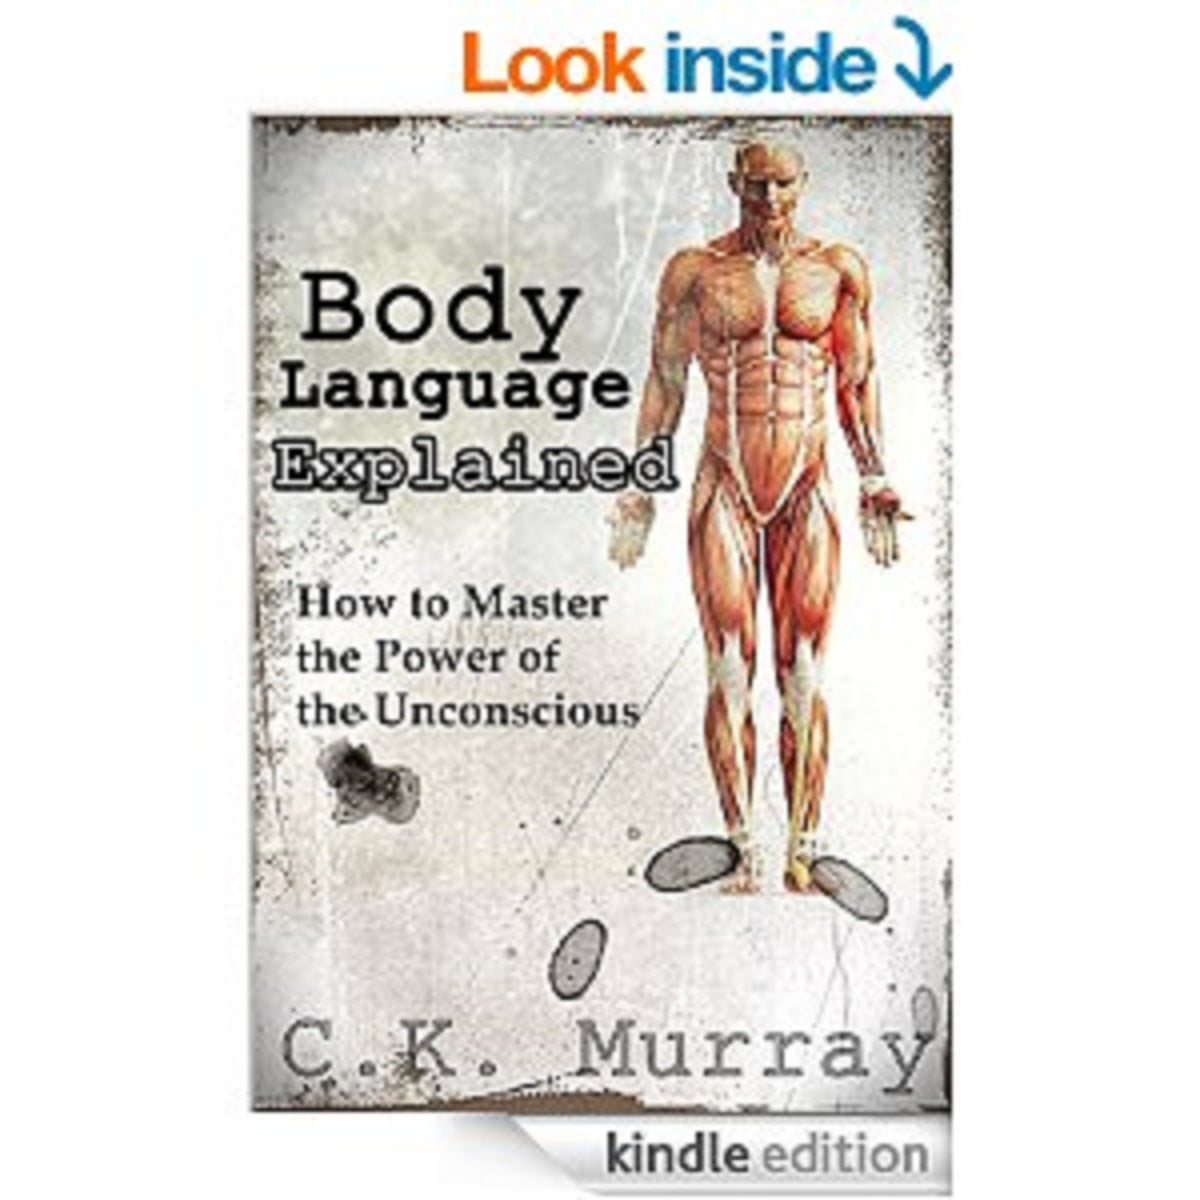 Book Review: Body Language Bible by C.K. Murray  